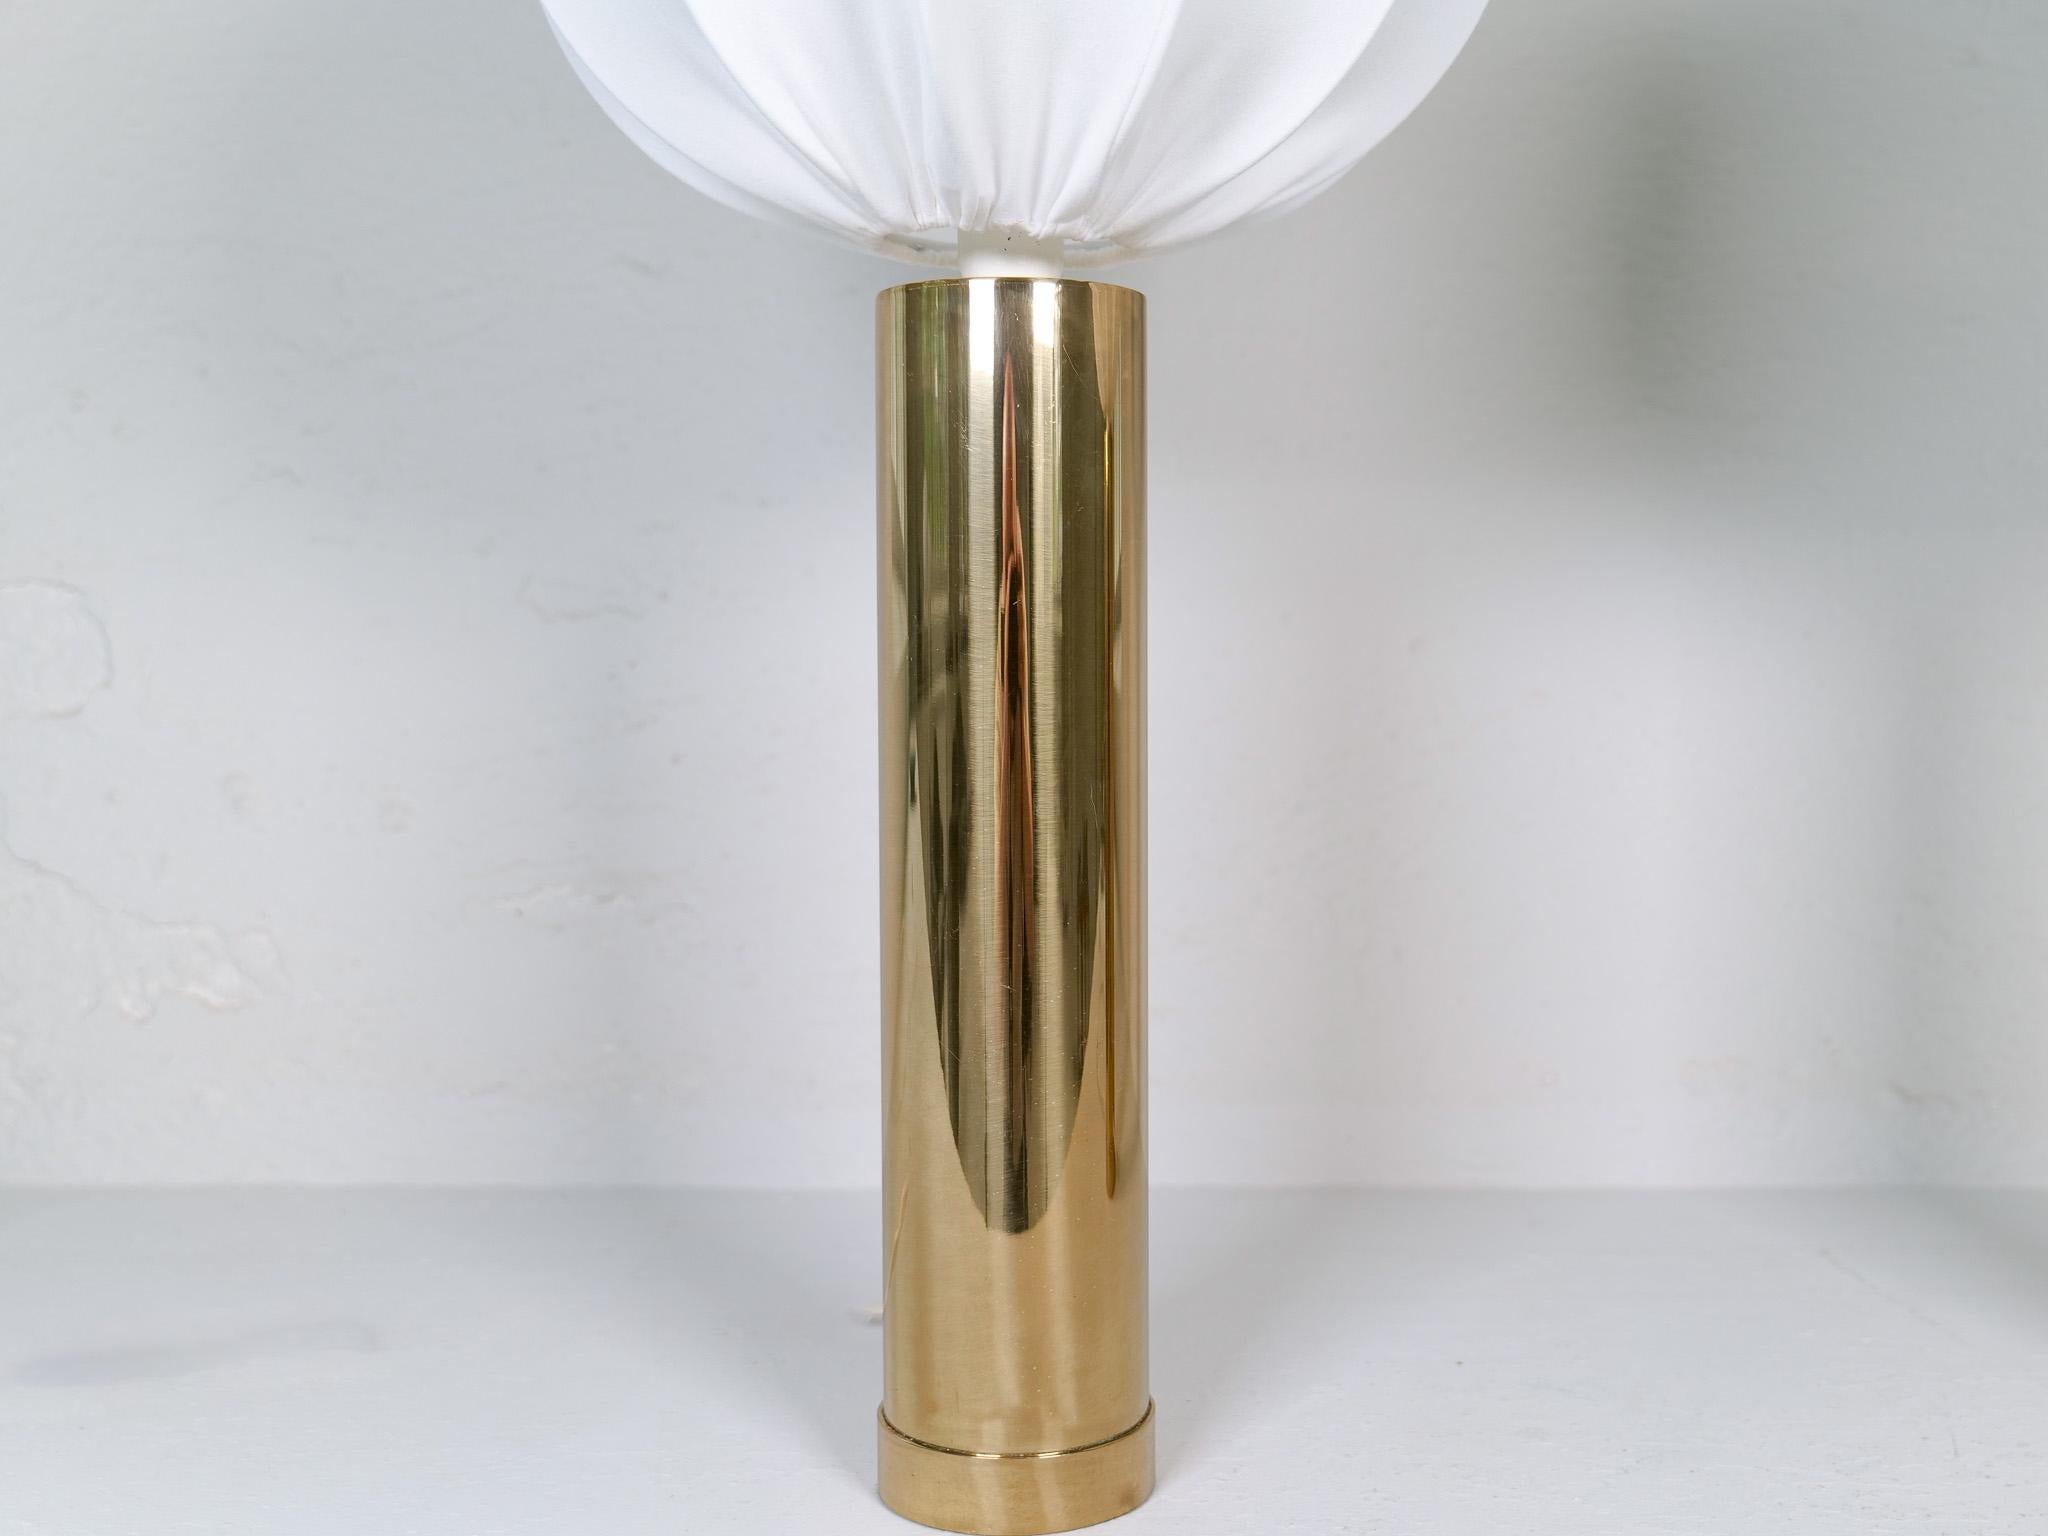 Midcentury Pair of Large Brass Bergboms B-010 Table Lamps, 1960s, Sweden For Sale 1